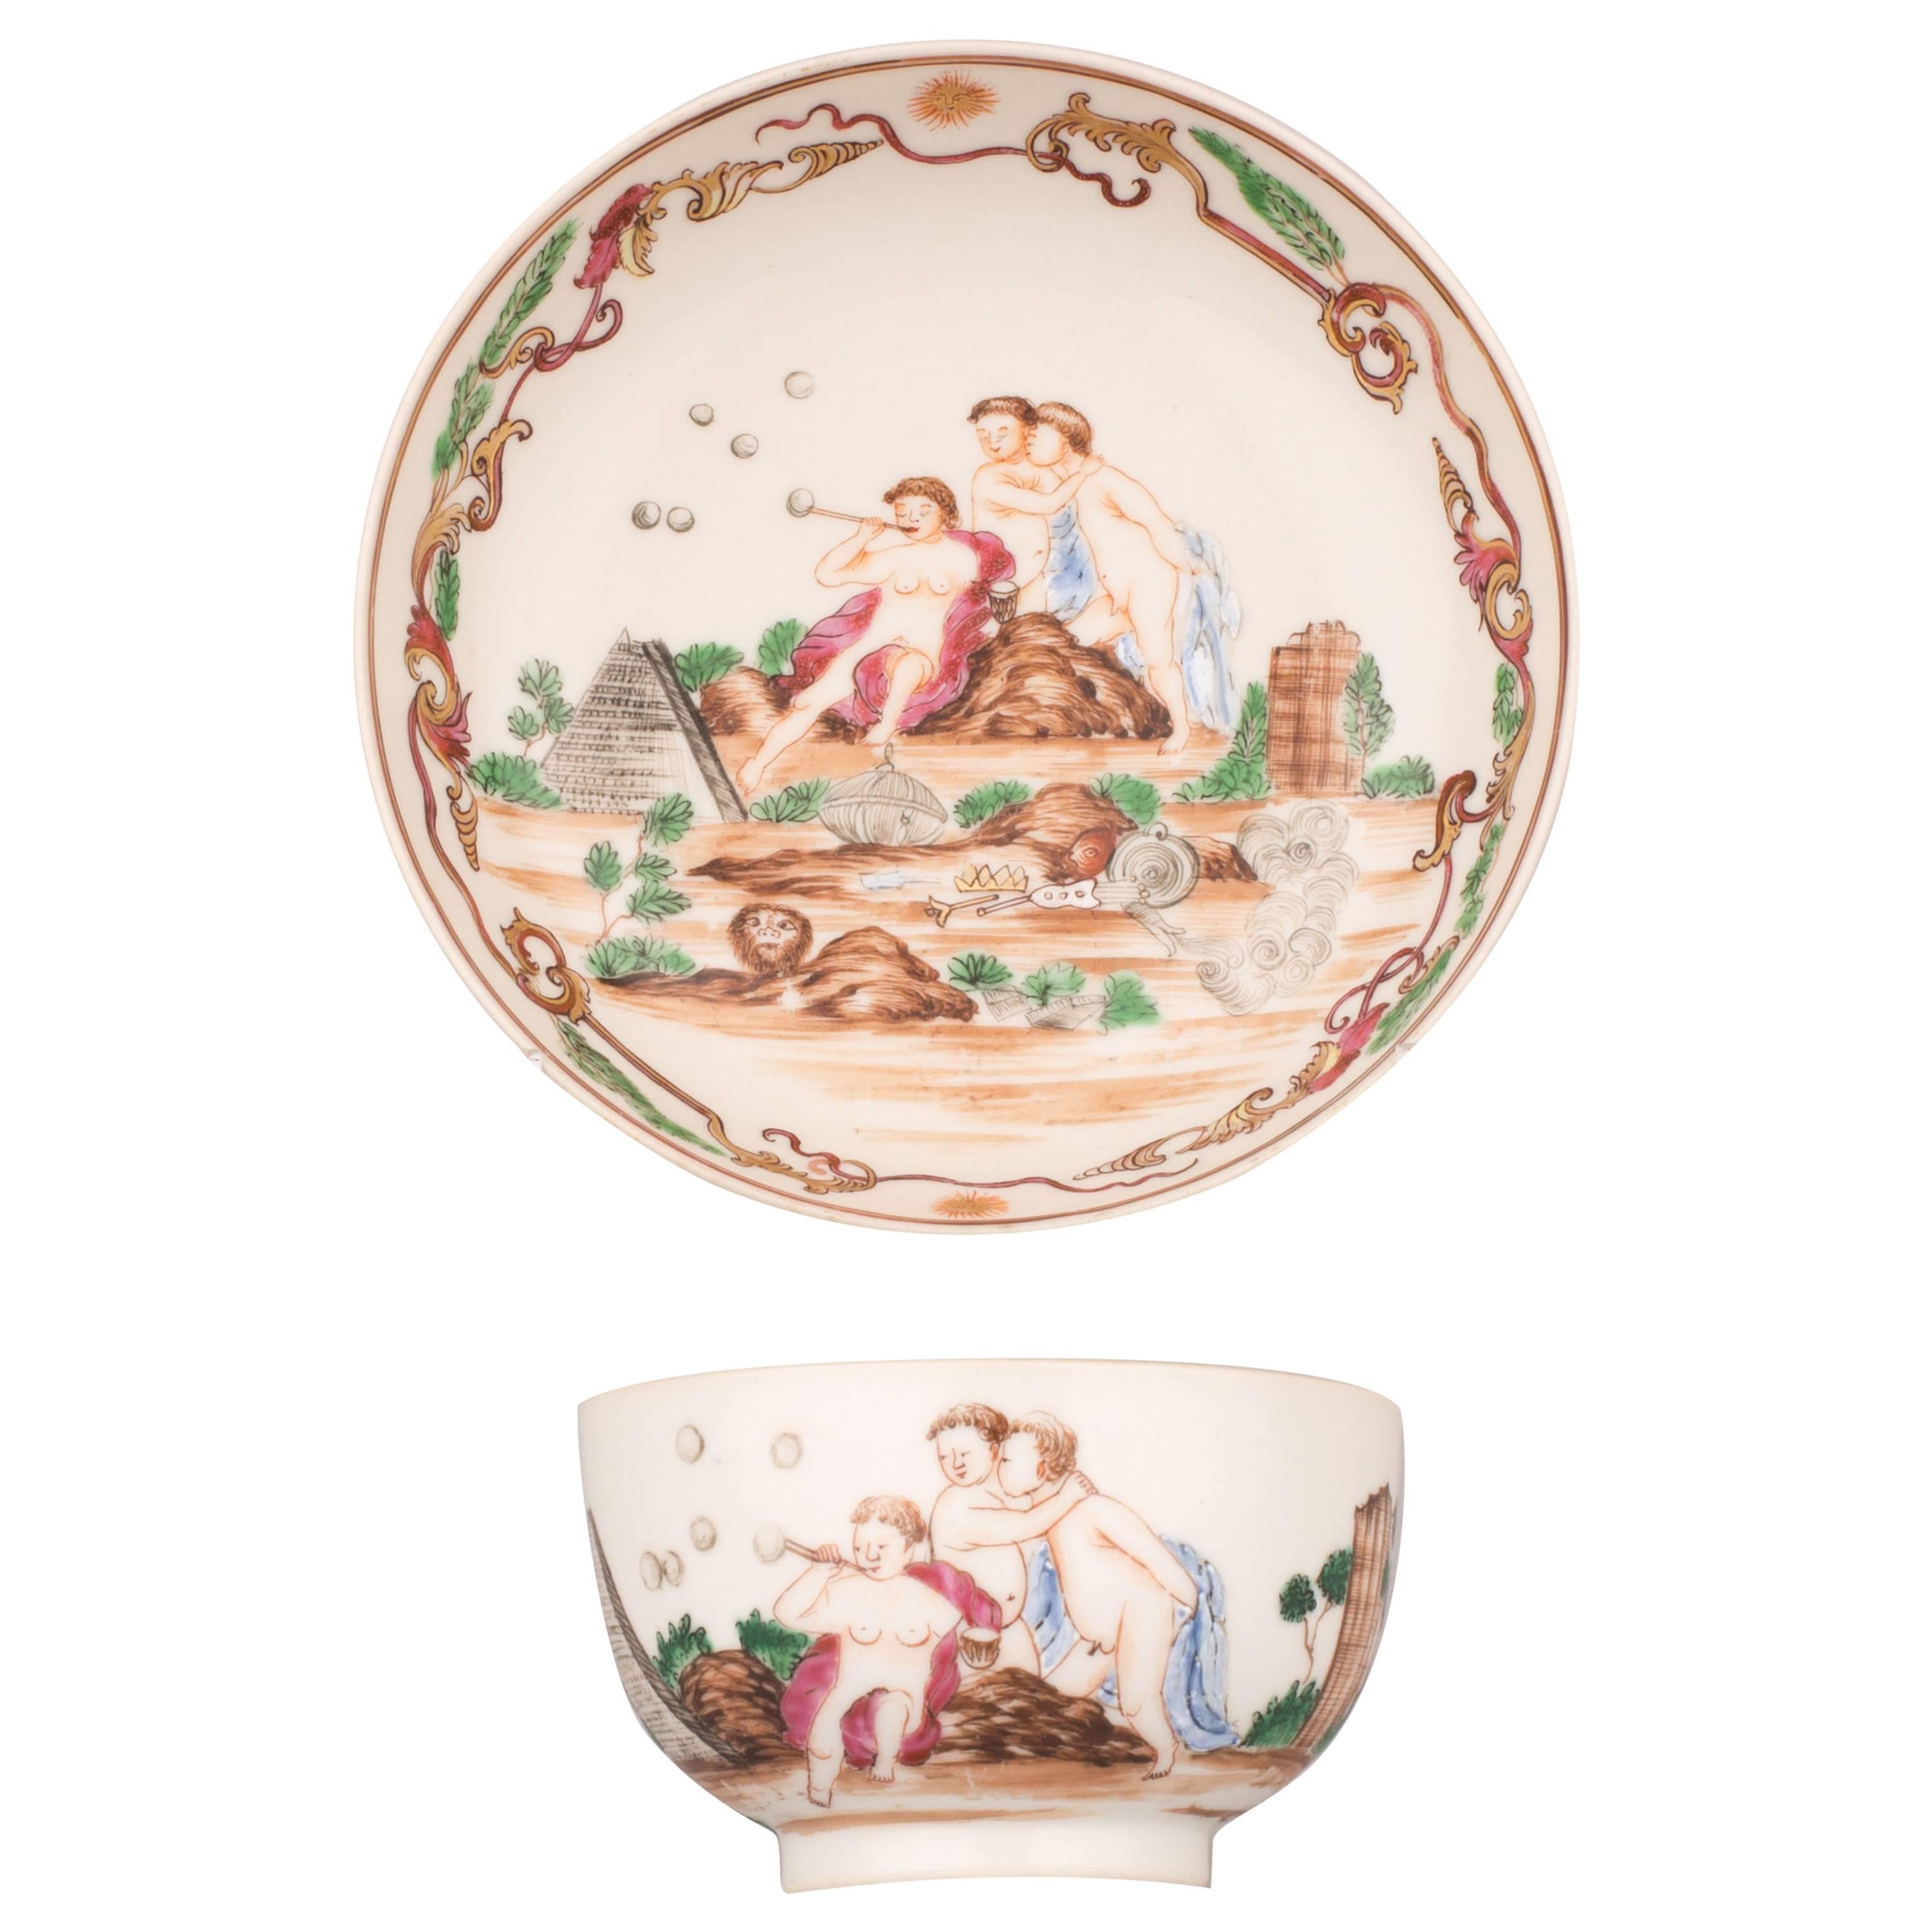 Chinese Export Porcelain Famille Rose Tea Bowl and Saucer, 18th Century For Sale